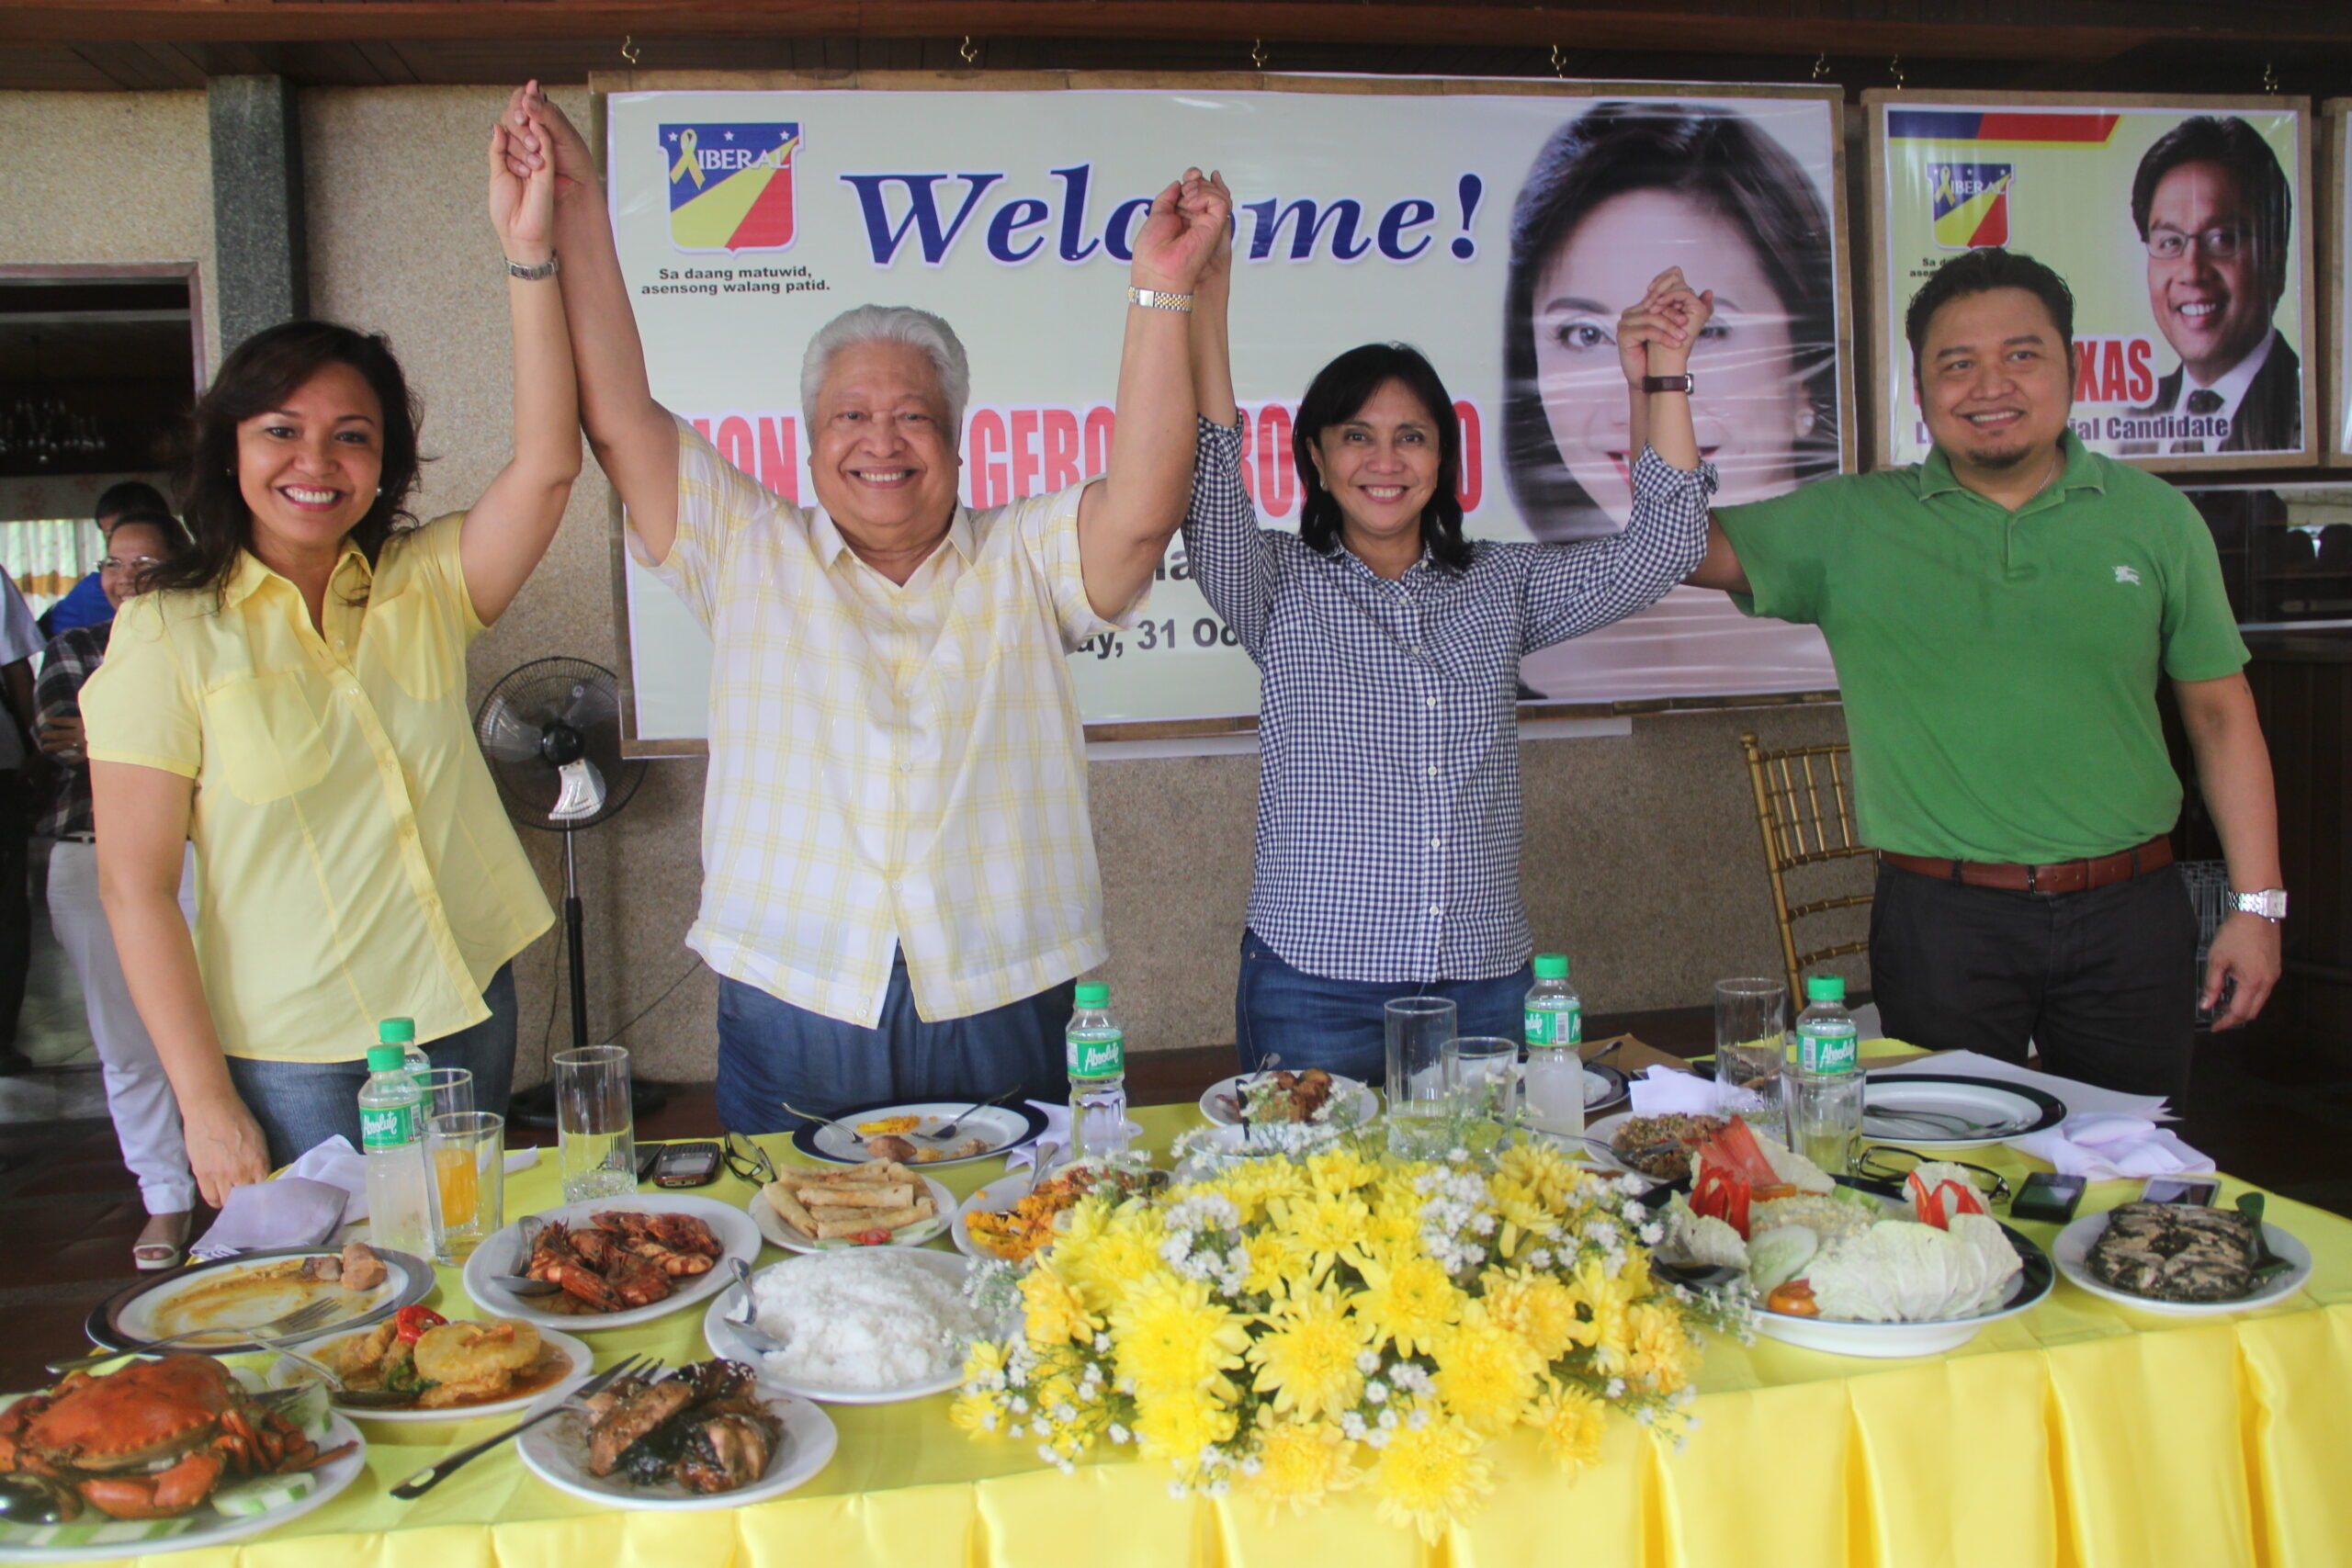 Leni Robredo hopes to repeat victory with little campaign funds